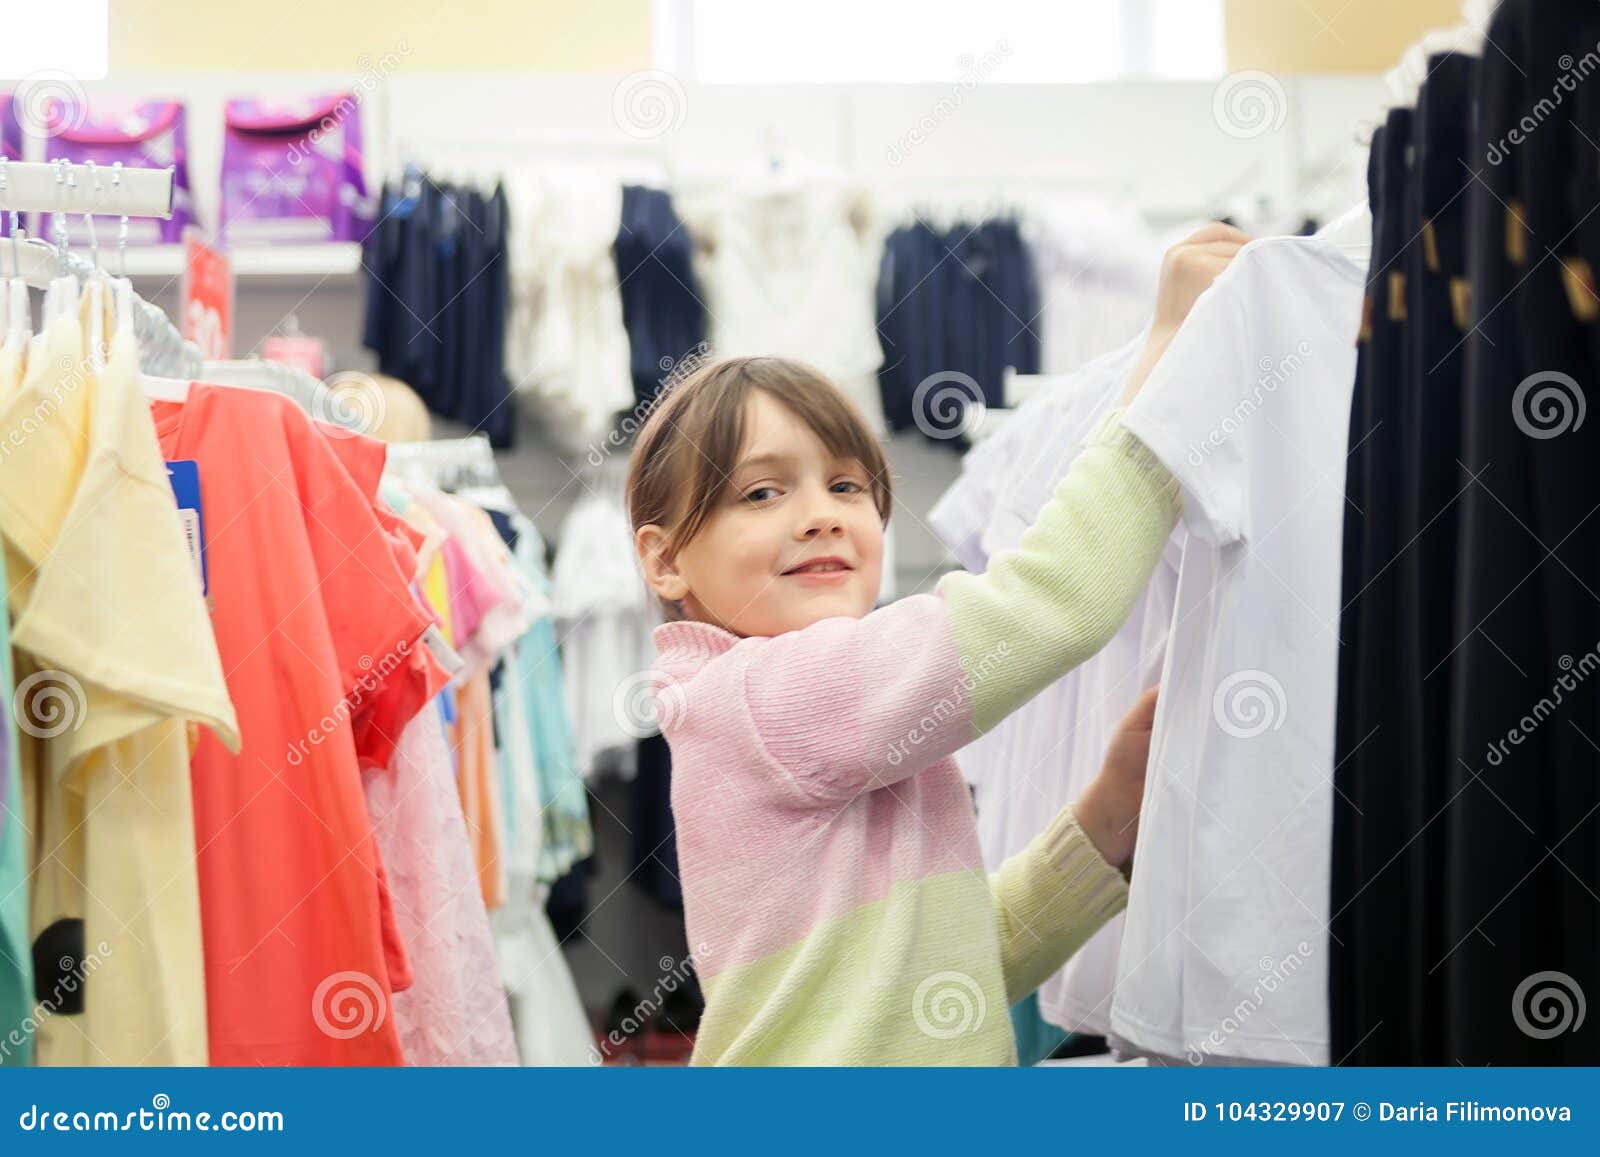 Little Girl Choosing Clothes Before School In Store Stock Image - Image ...